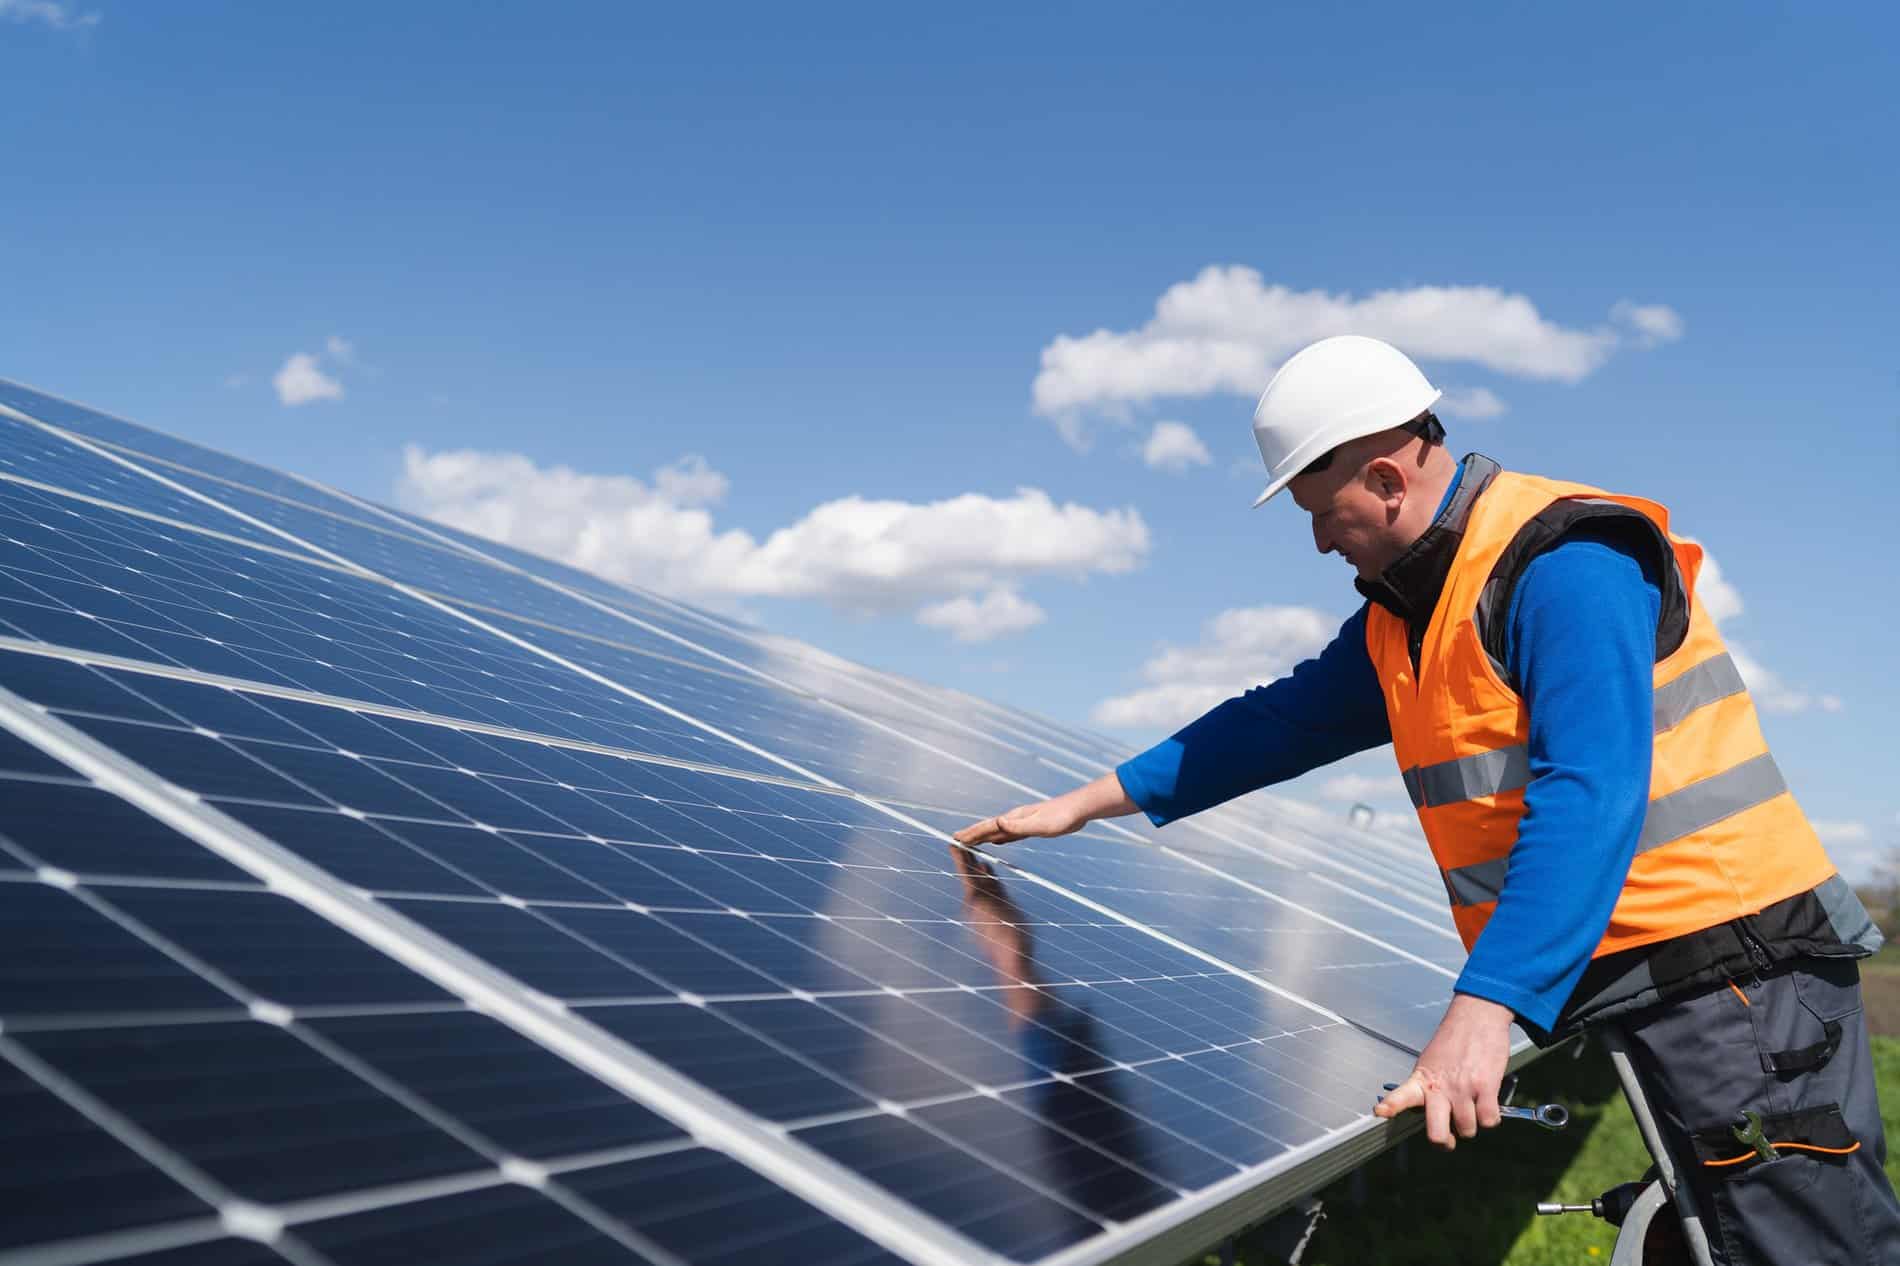 Solar power plant engineer makes a visual inspection of solar panels